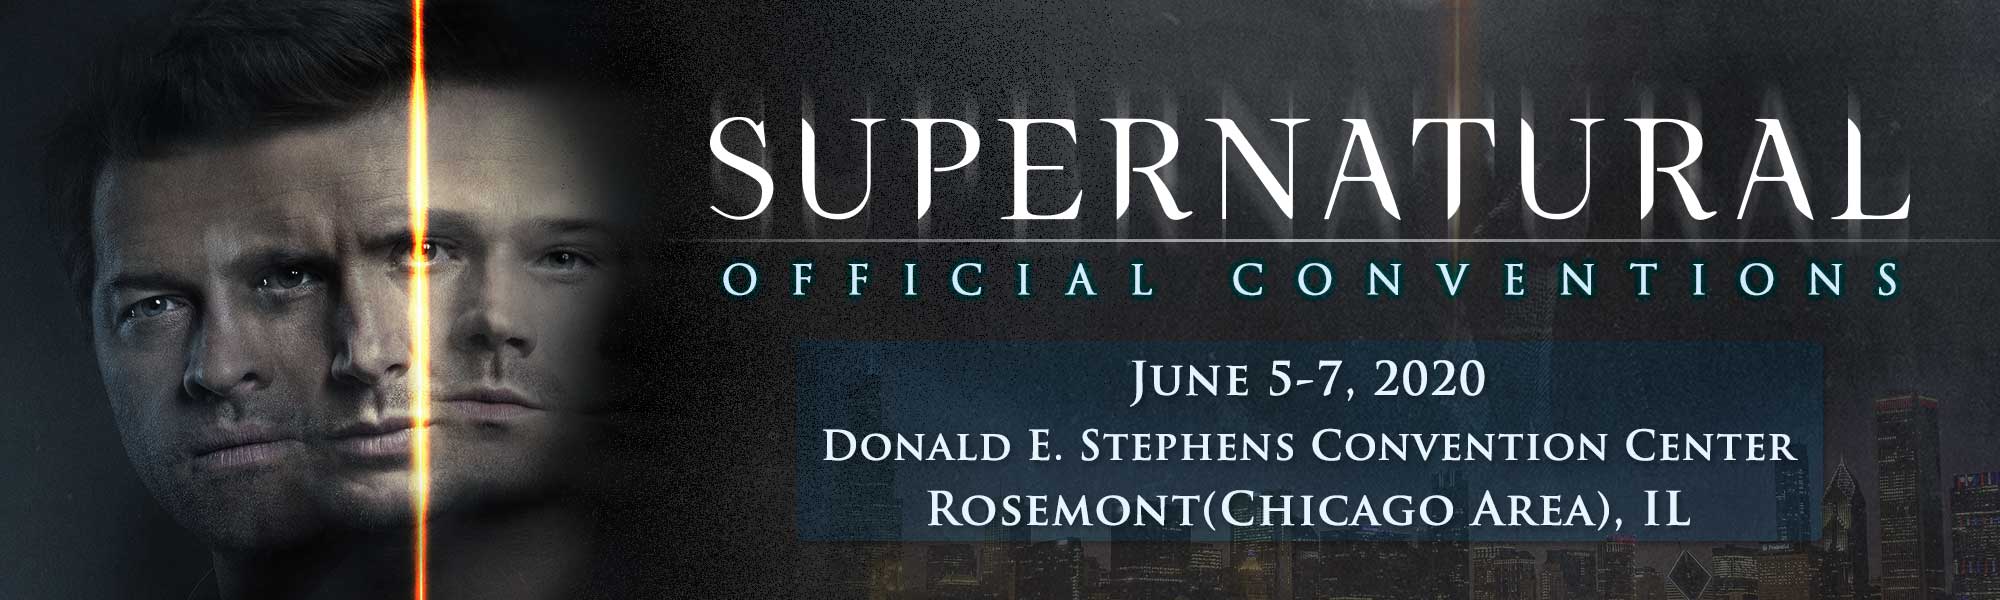 Creation Entertainment's Supernatural Offical Convention in Rosemont